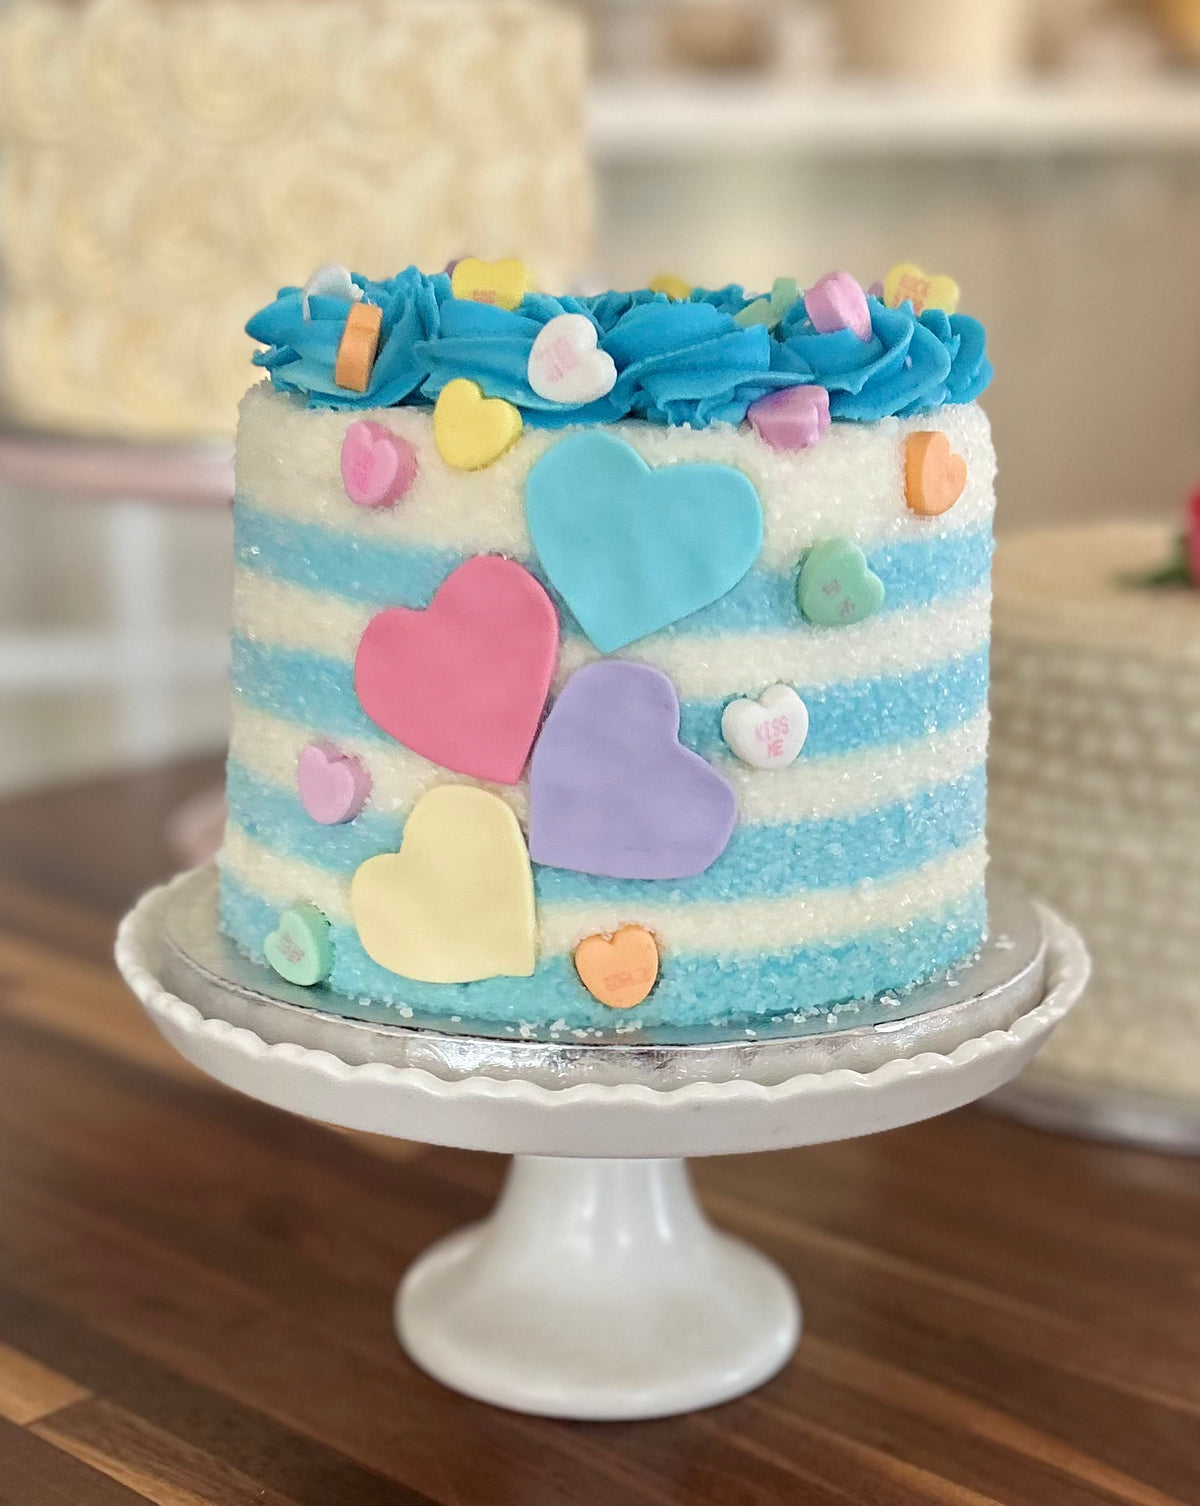 Sweet Candy Hearts - Petite – Fancy Fabric & Props